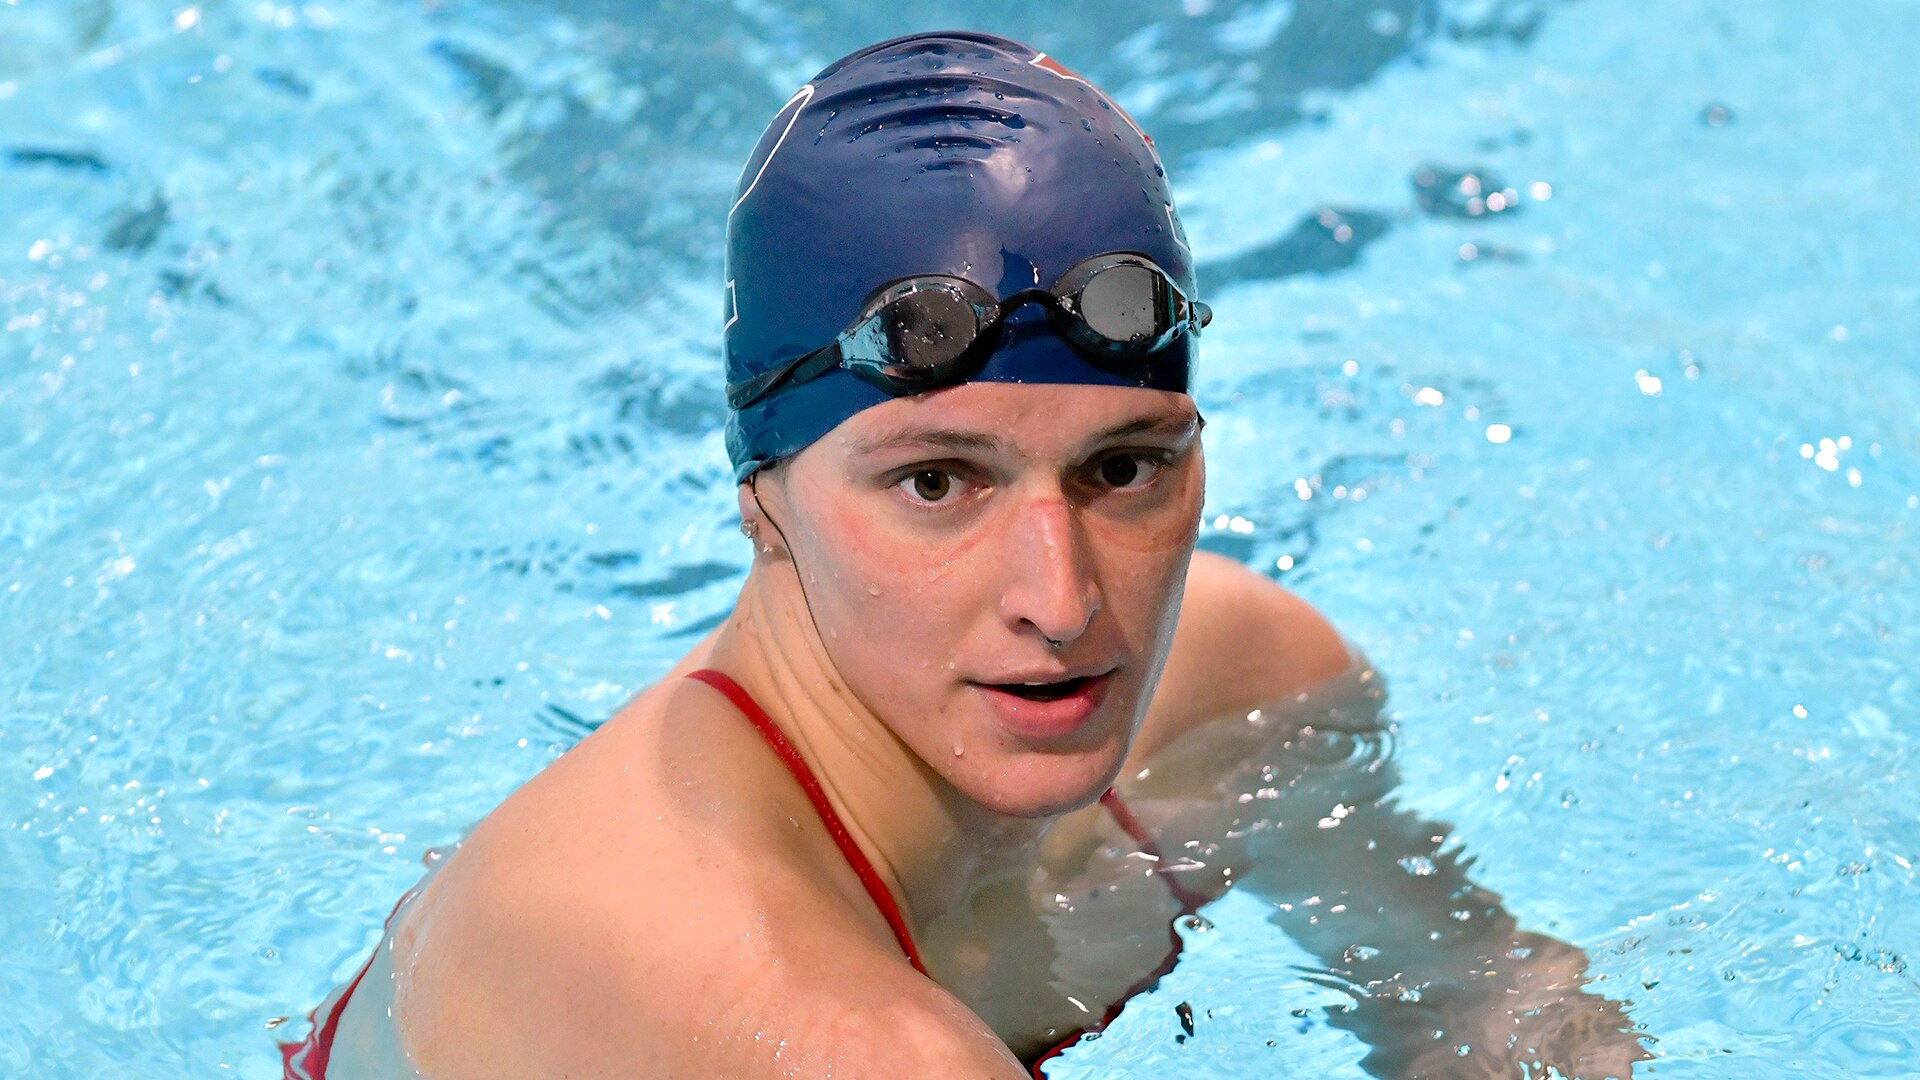 Watch TODAY Excerpt Trans swimmer Lia Thomas speaks out on scrutiny